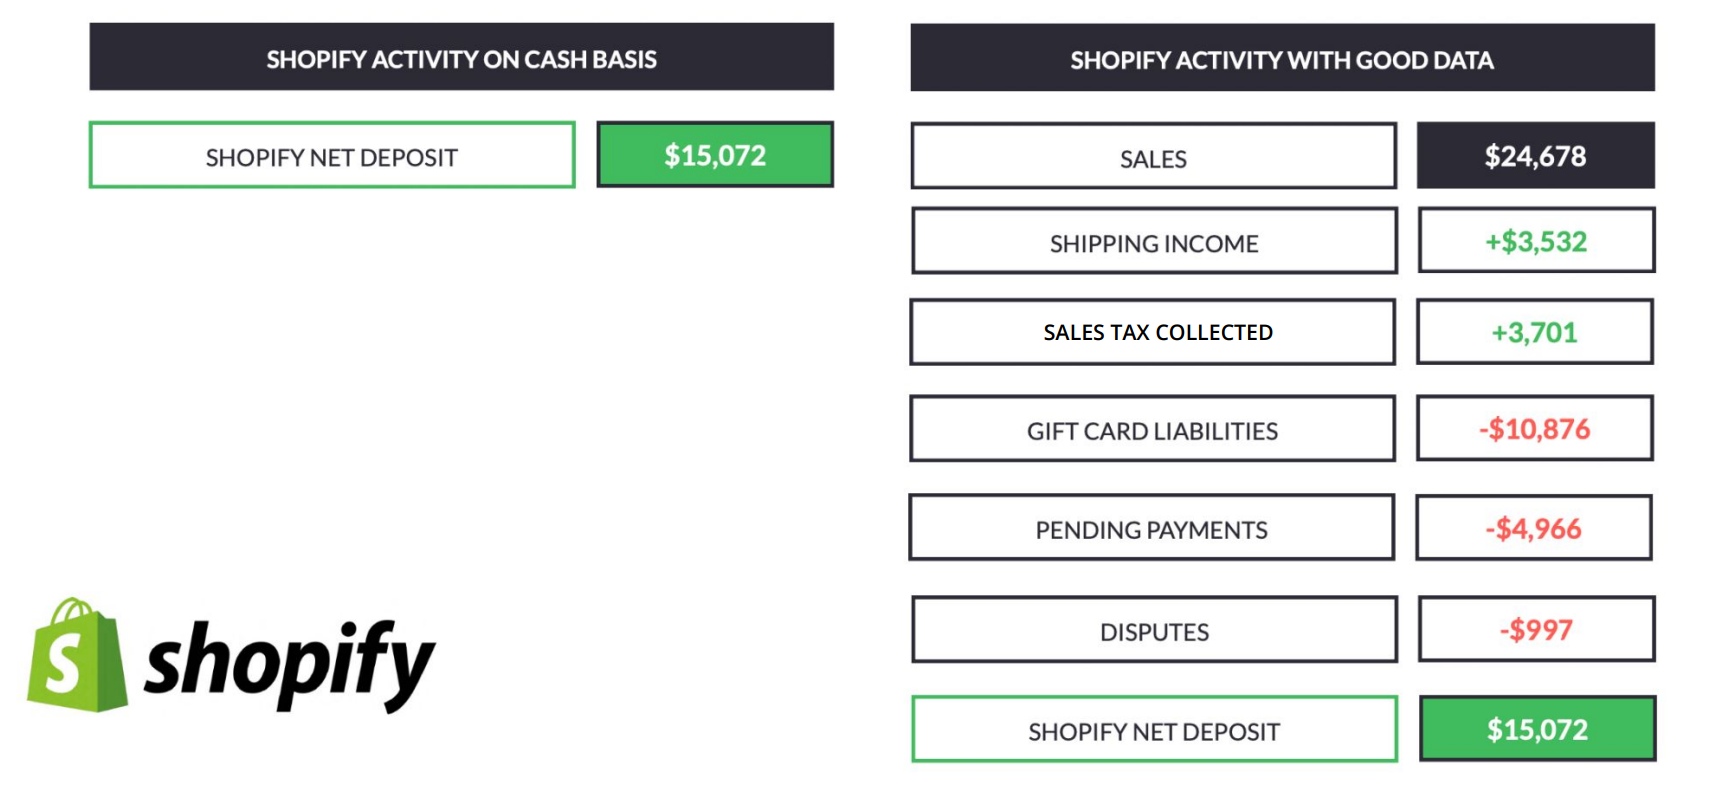 The left side shows what a Shopify payout looks like, the right side shows that deposit broken down by transaction types